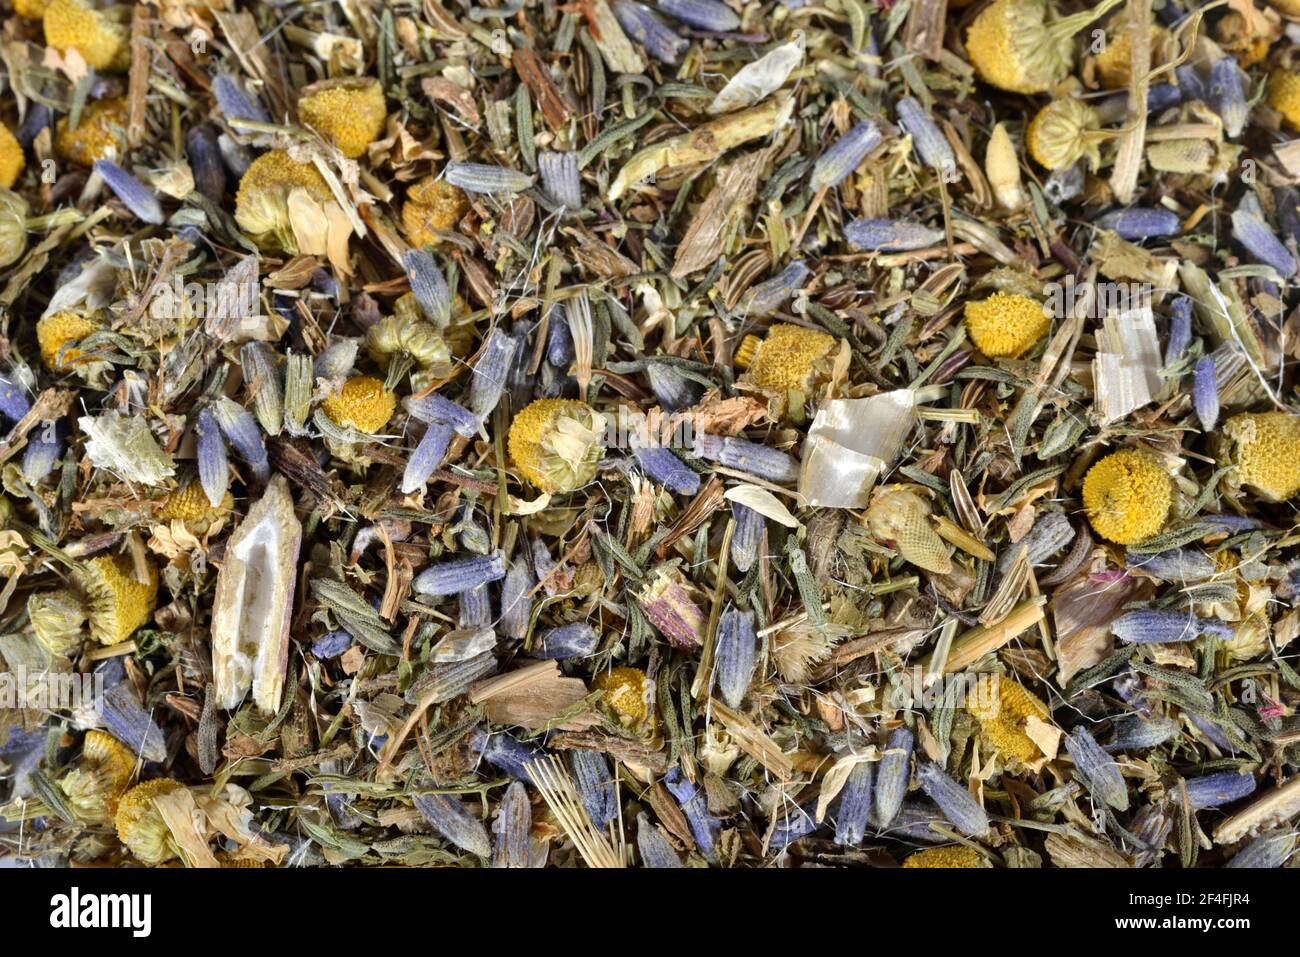 Stomach tea, Cnicus (Cnicus benedictus) centaury, chamomile, chamomile flowers, thyme leaves, fruits, Carawayaniseed, aniseed, lavender flowers Stock Photo